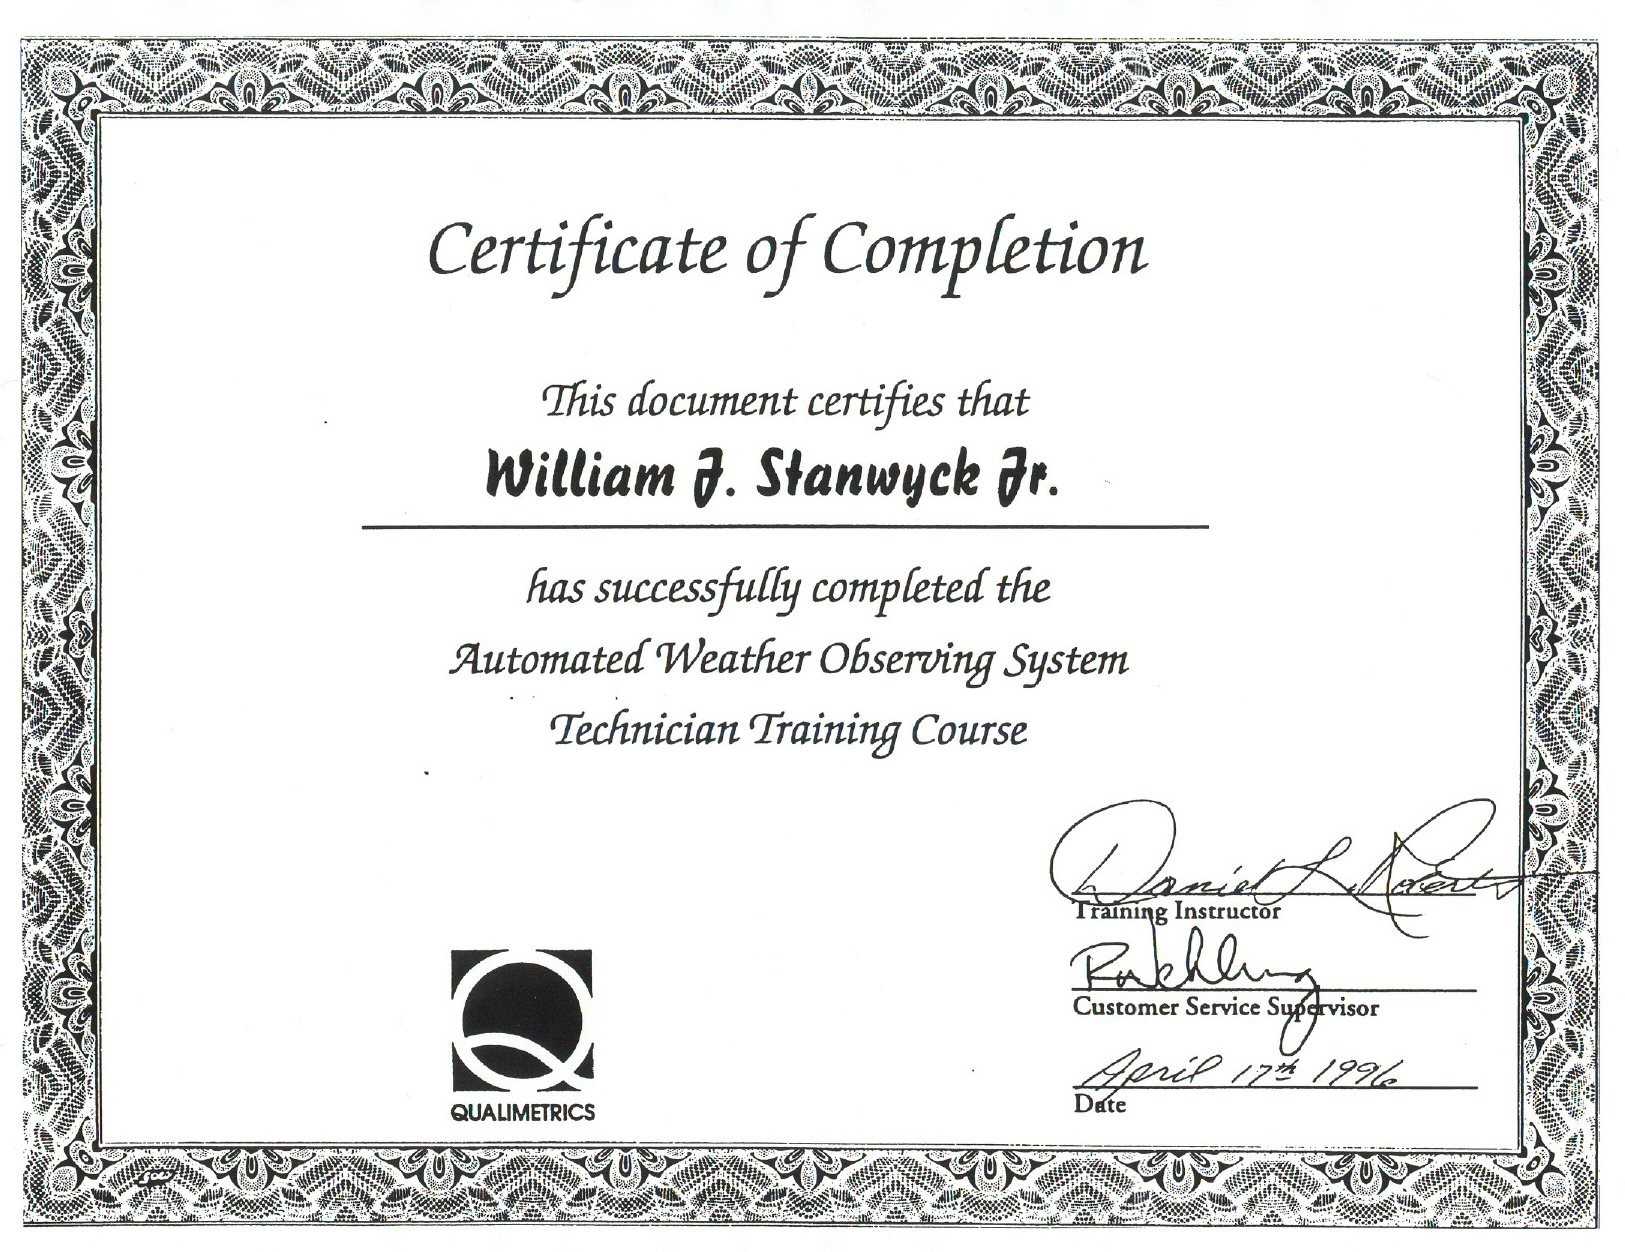 Certificates: A Free Gift Certificate Template Makes Giving With This Entitles The Bearer To Template Certificate